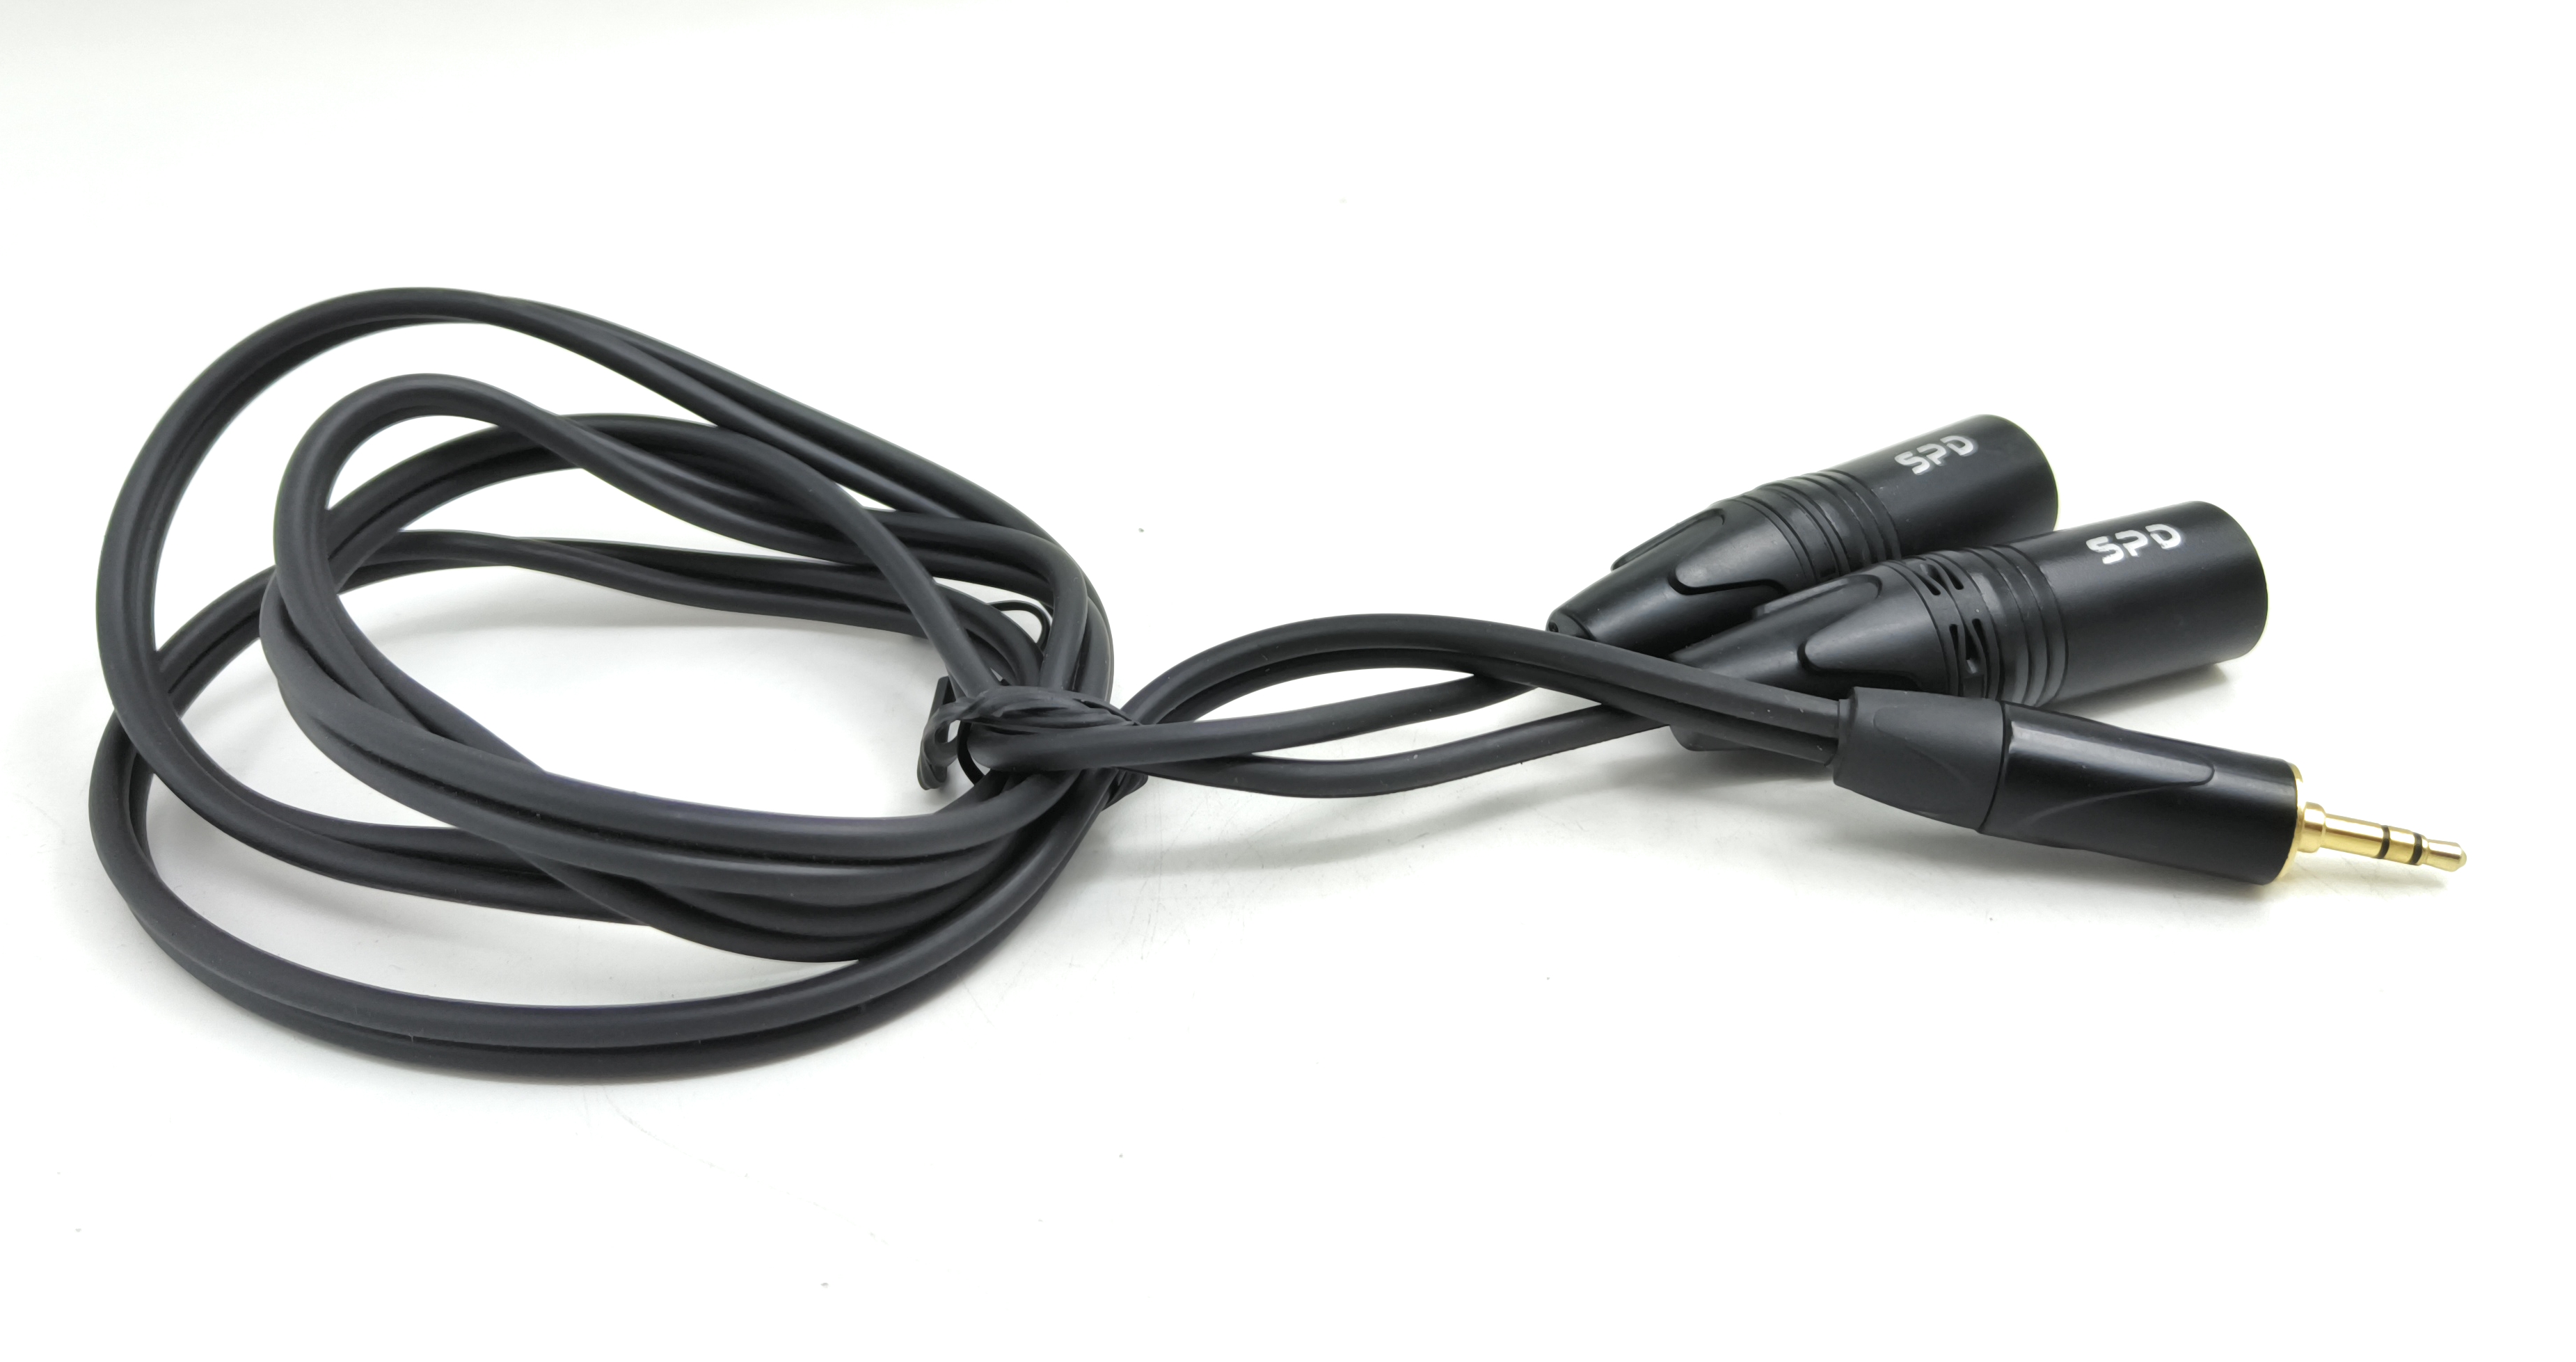 TCB6 | 3.5mm TRS Male to XLR Female Audio Output Cable | Movo